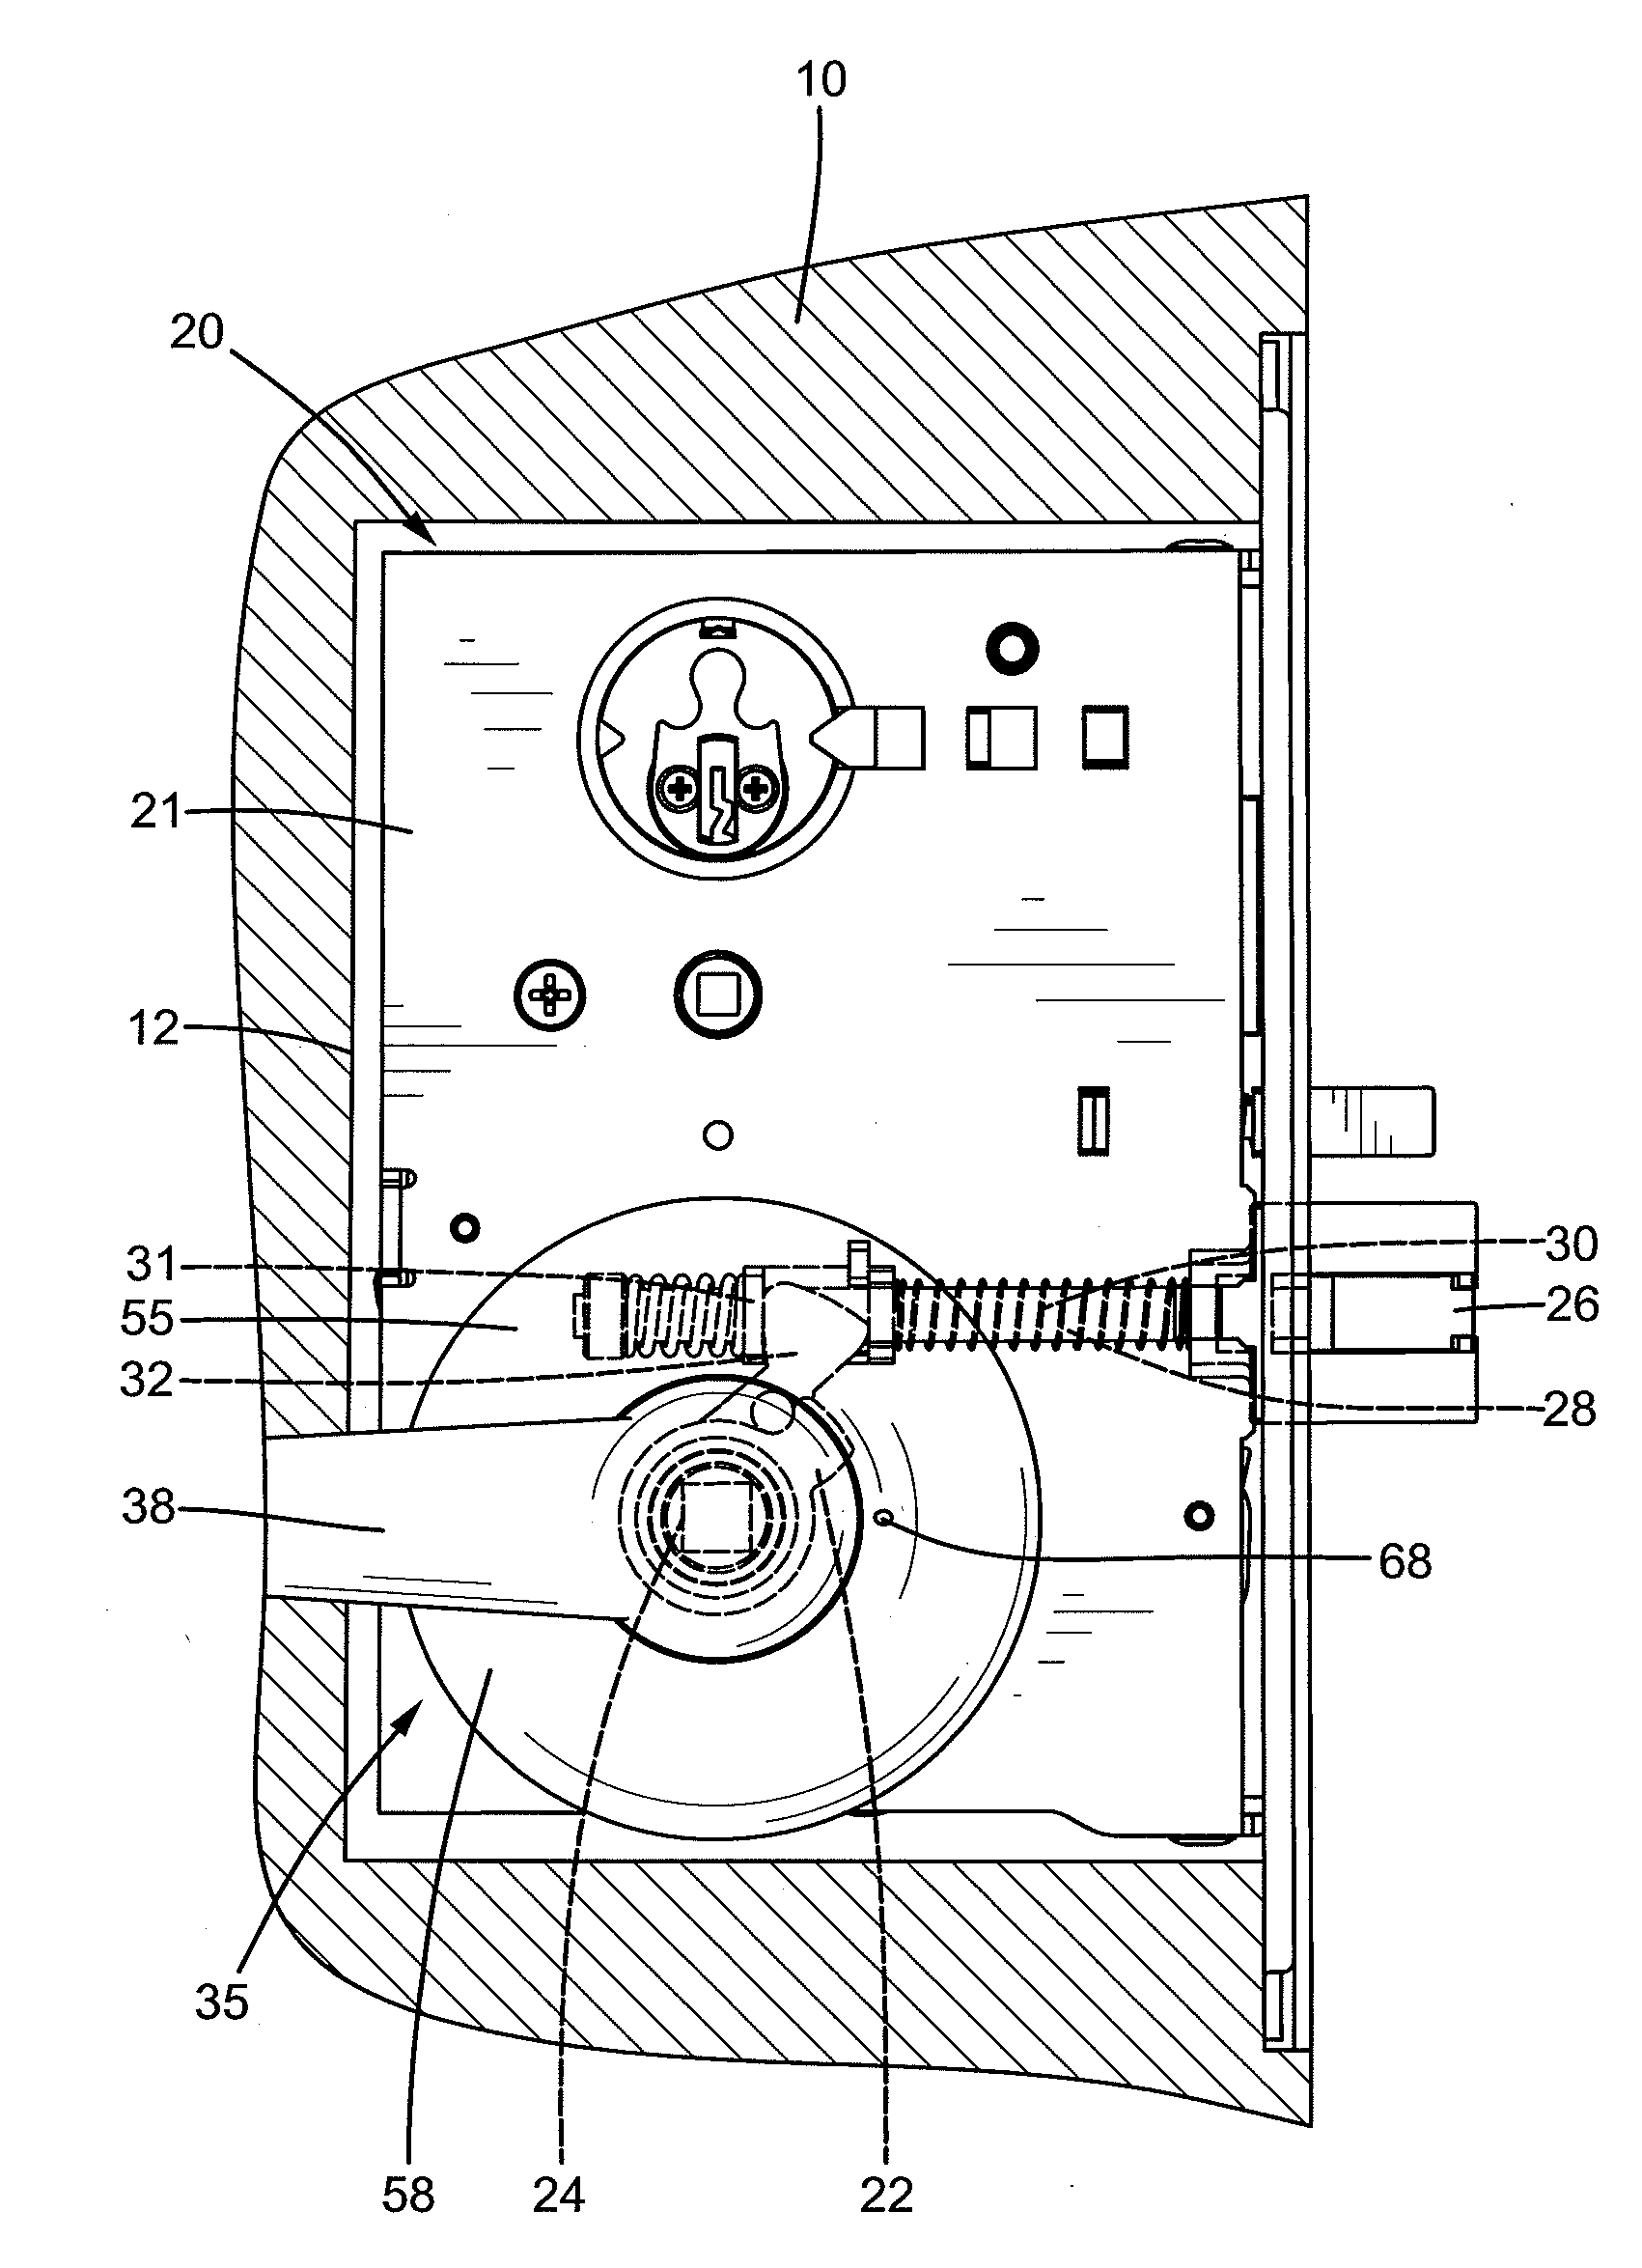 Operational Device for Lock